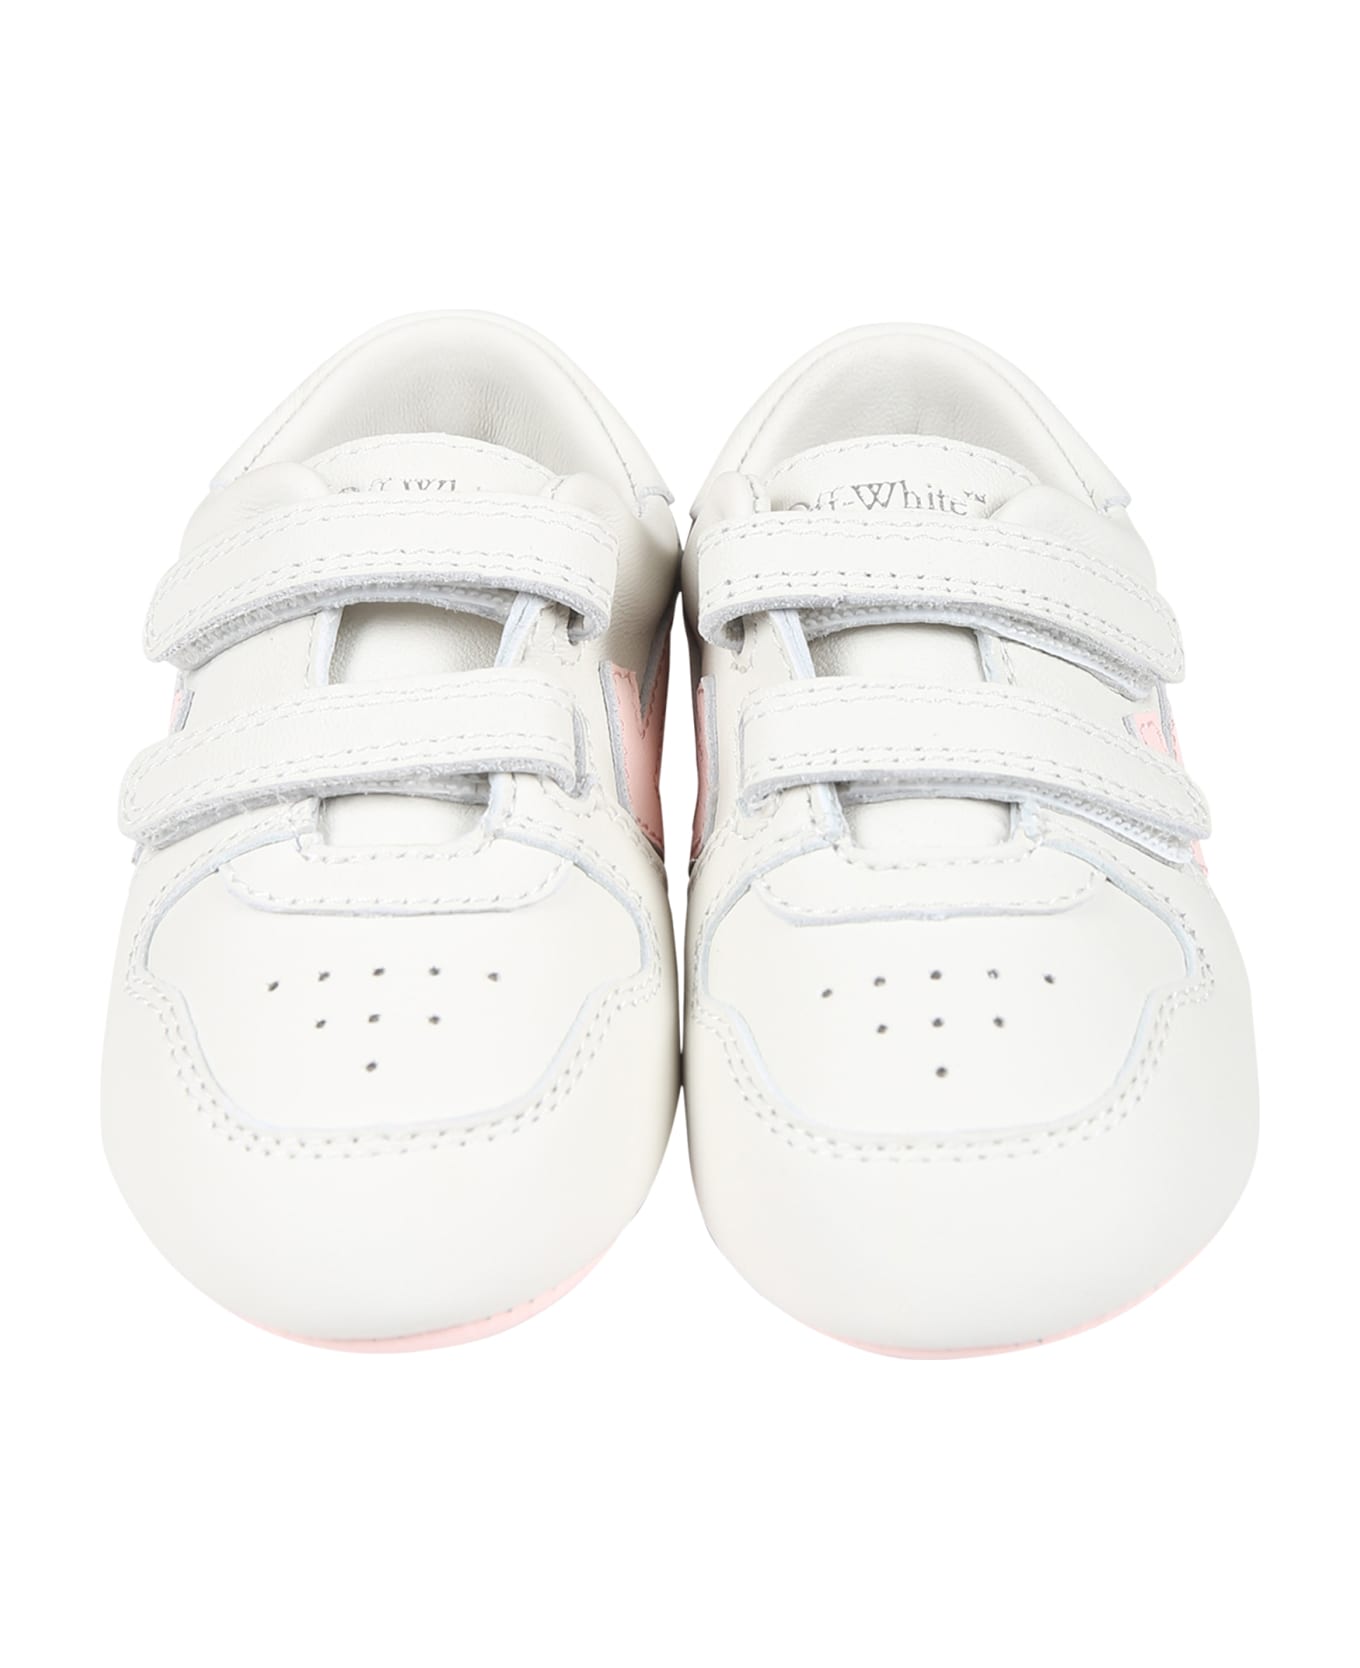 Off-White Grey Sneaker For Baby Girl With Arrows - White シューズ